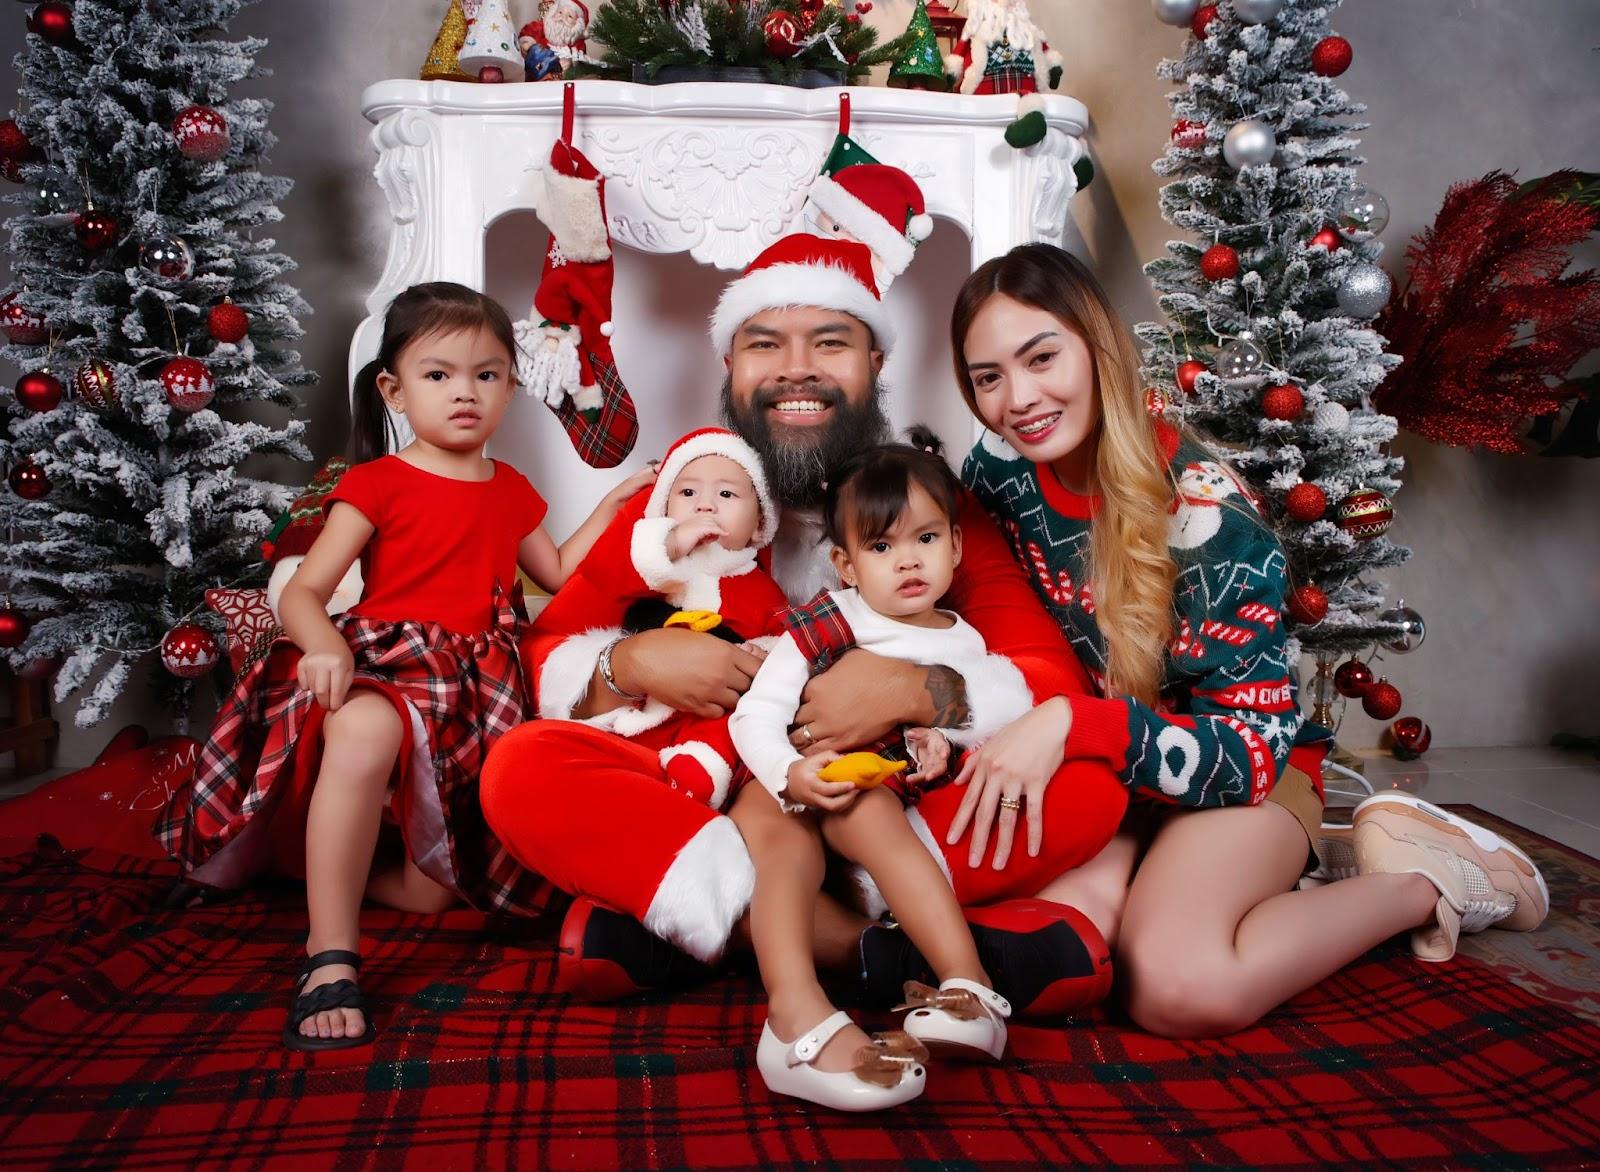 newborn christmas photo idea: newborn posed with family members wearing christmas outfits